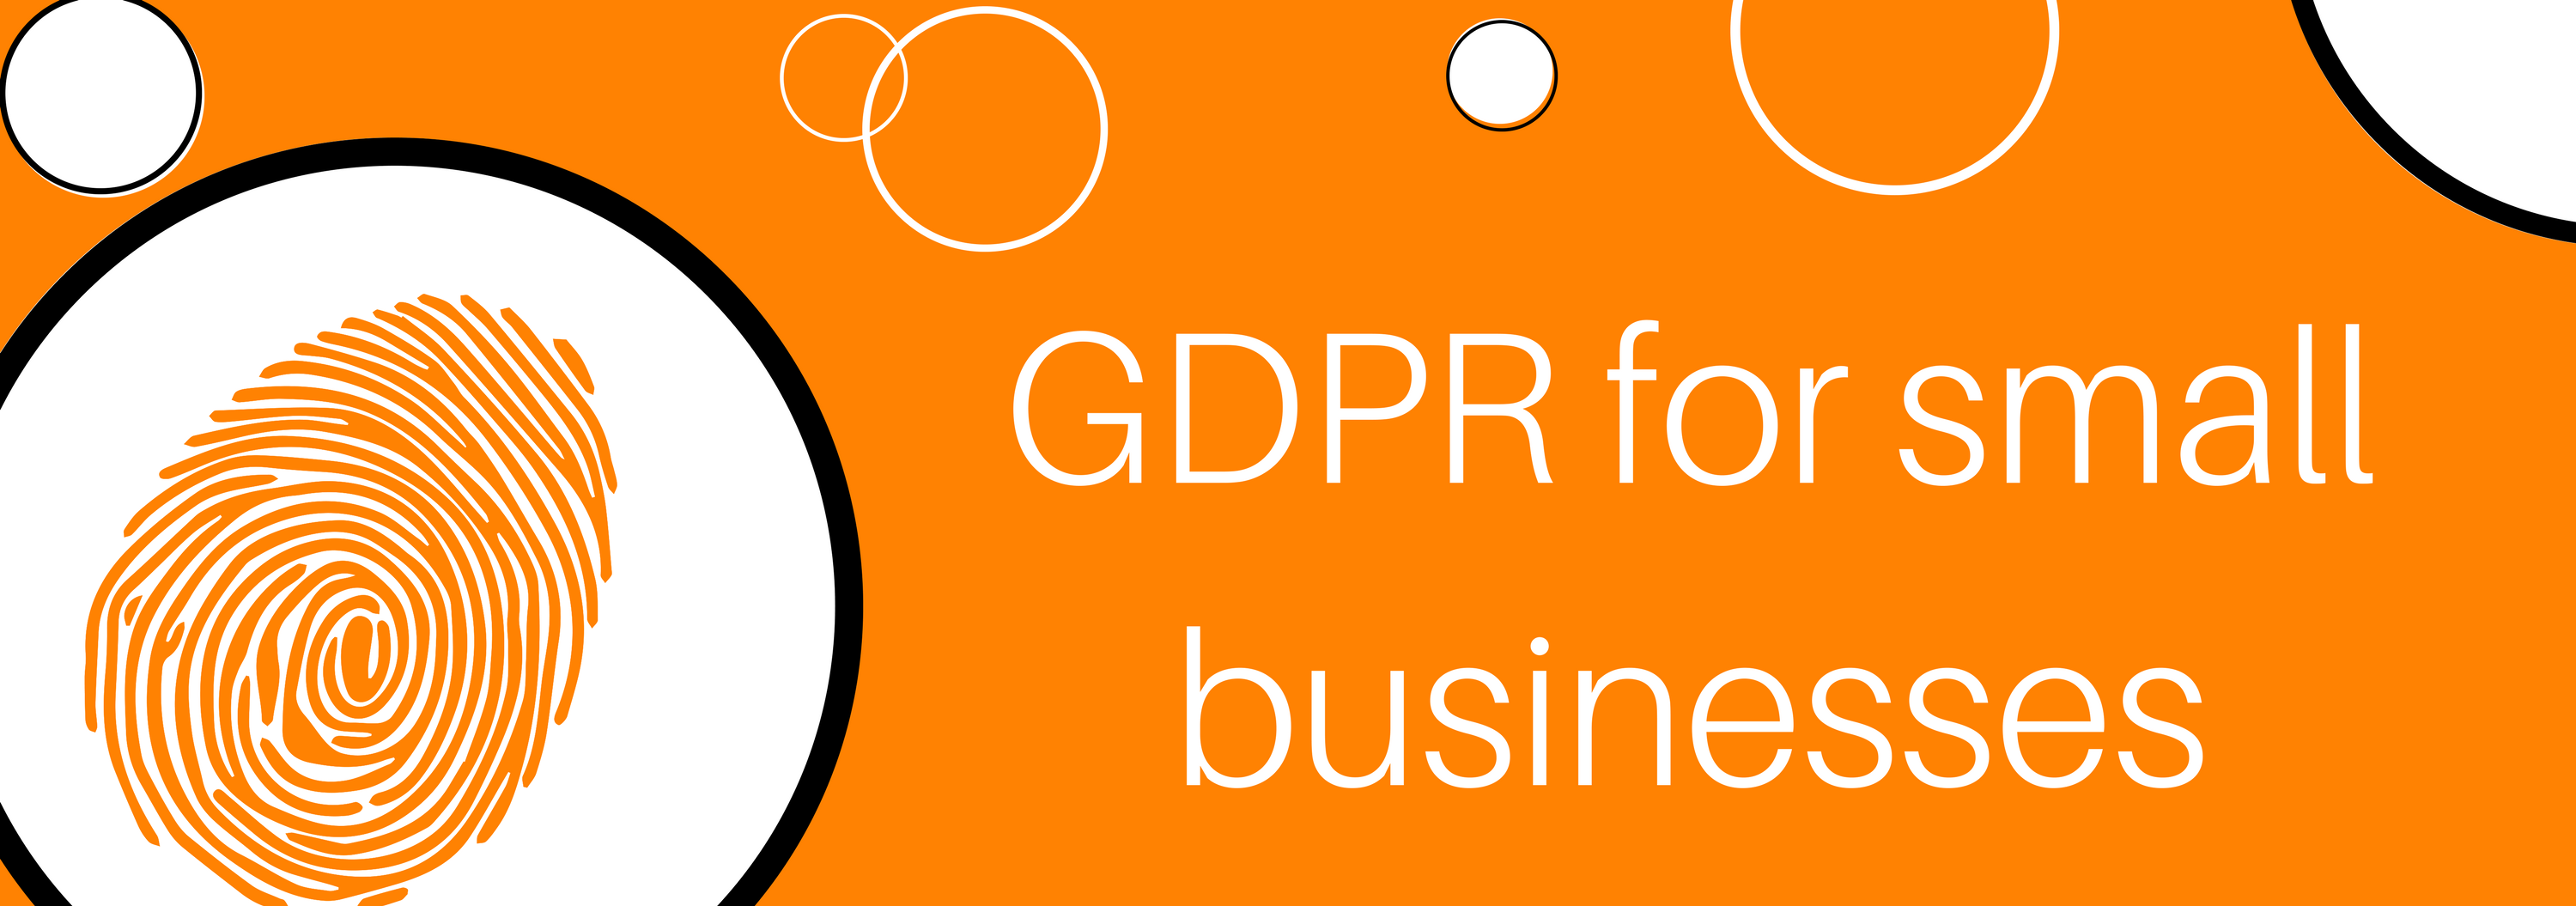 GDPR for small businesses